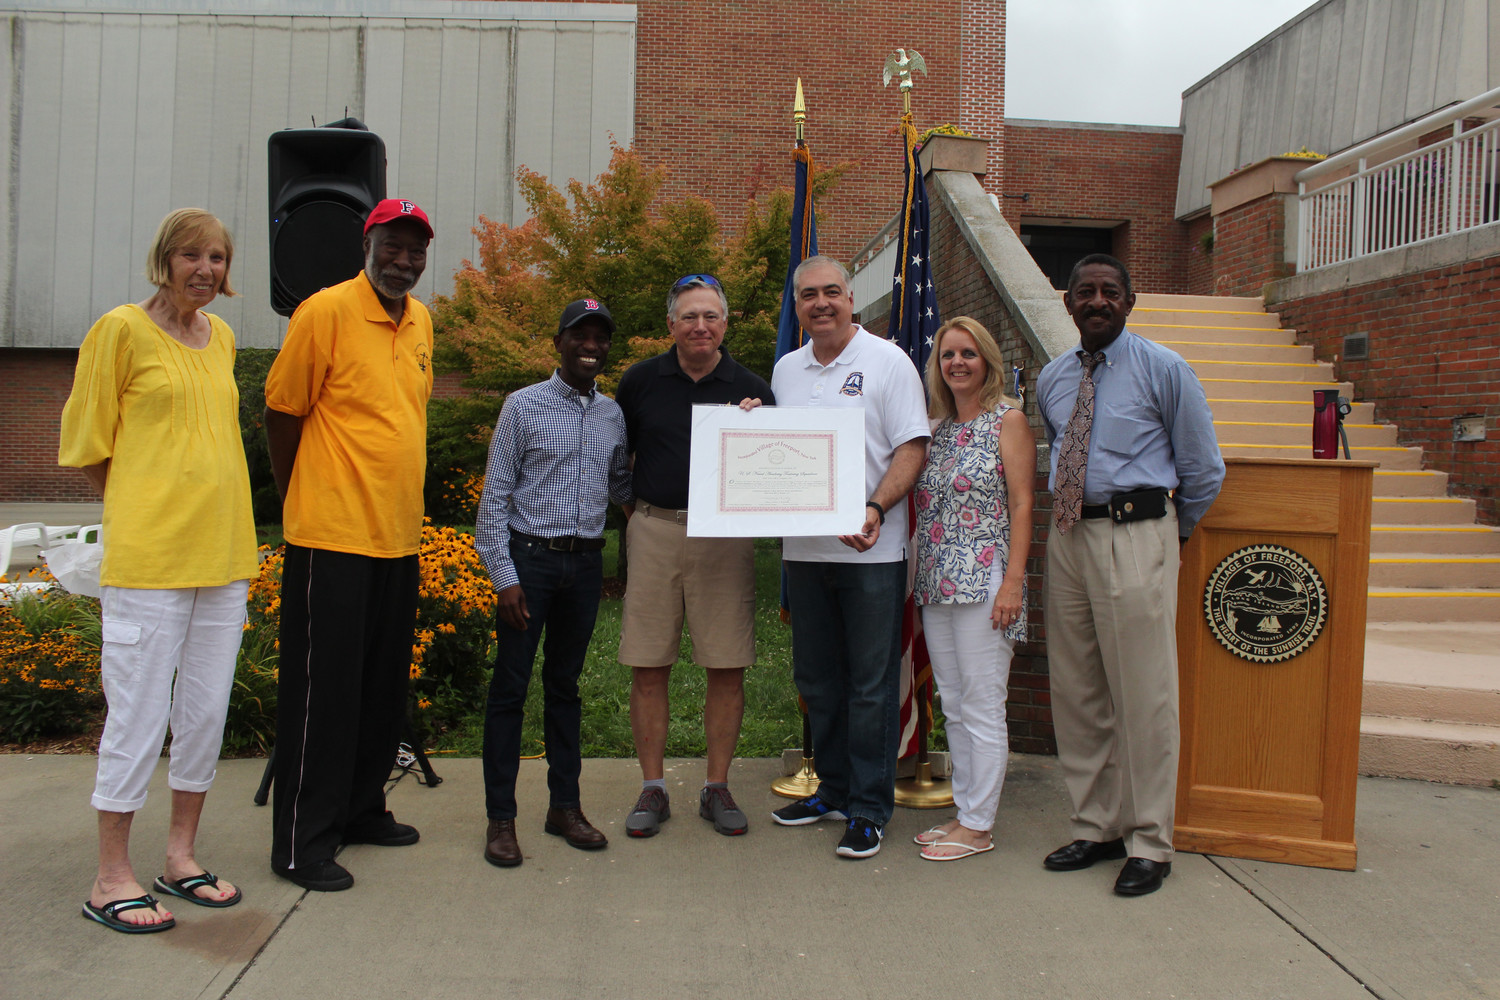 Debra Mulé is often seen at events throughout the community. Last summer she welcomed cadets from the U.S. Naval Academy. From left were Village Historian Cynthia King, school board Members Ernie Kight and Anthony Miller, Capt. Rick Robey, Deputy Mayor George Martinez, Mulé and village Trustee Ron Ellerbee.